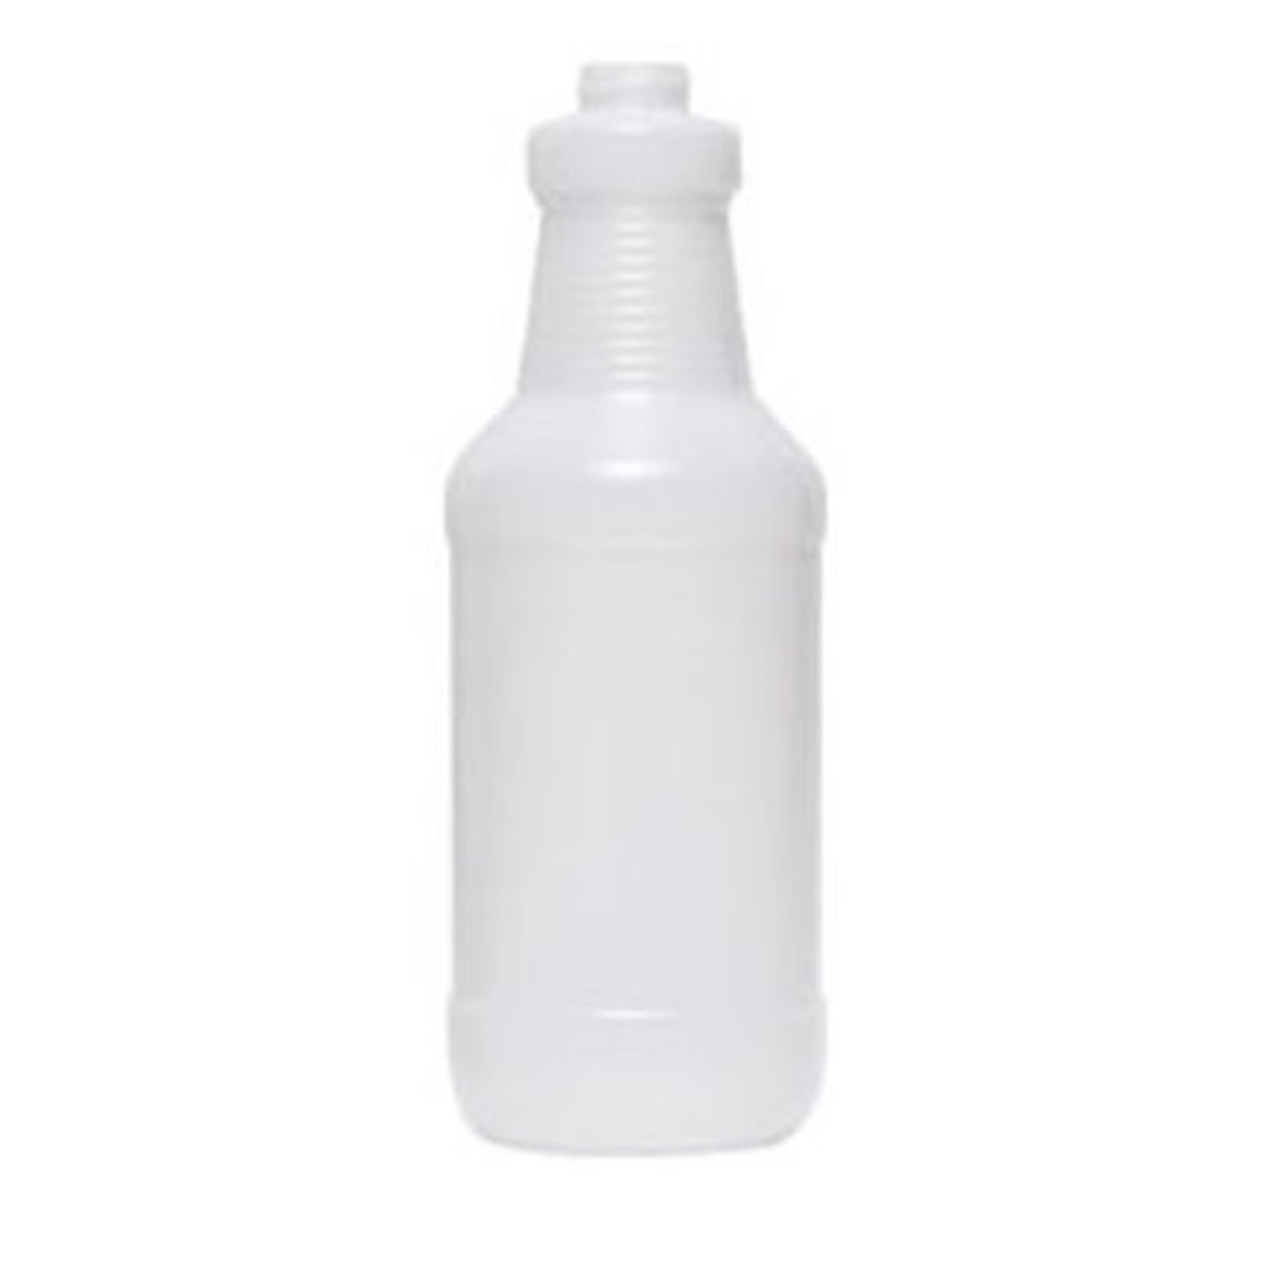 32 oz Natural HDPE Plastic Spray Bottles (Cap Not Included) - Natural BPA Free 28-400